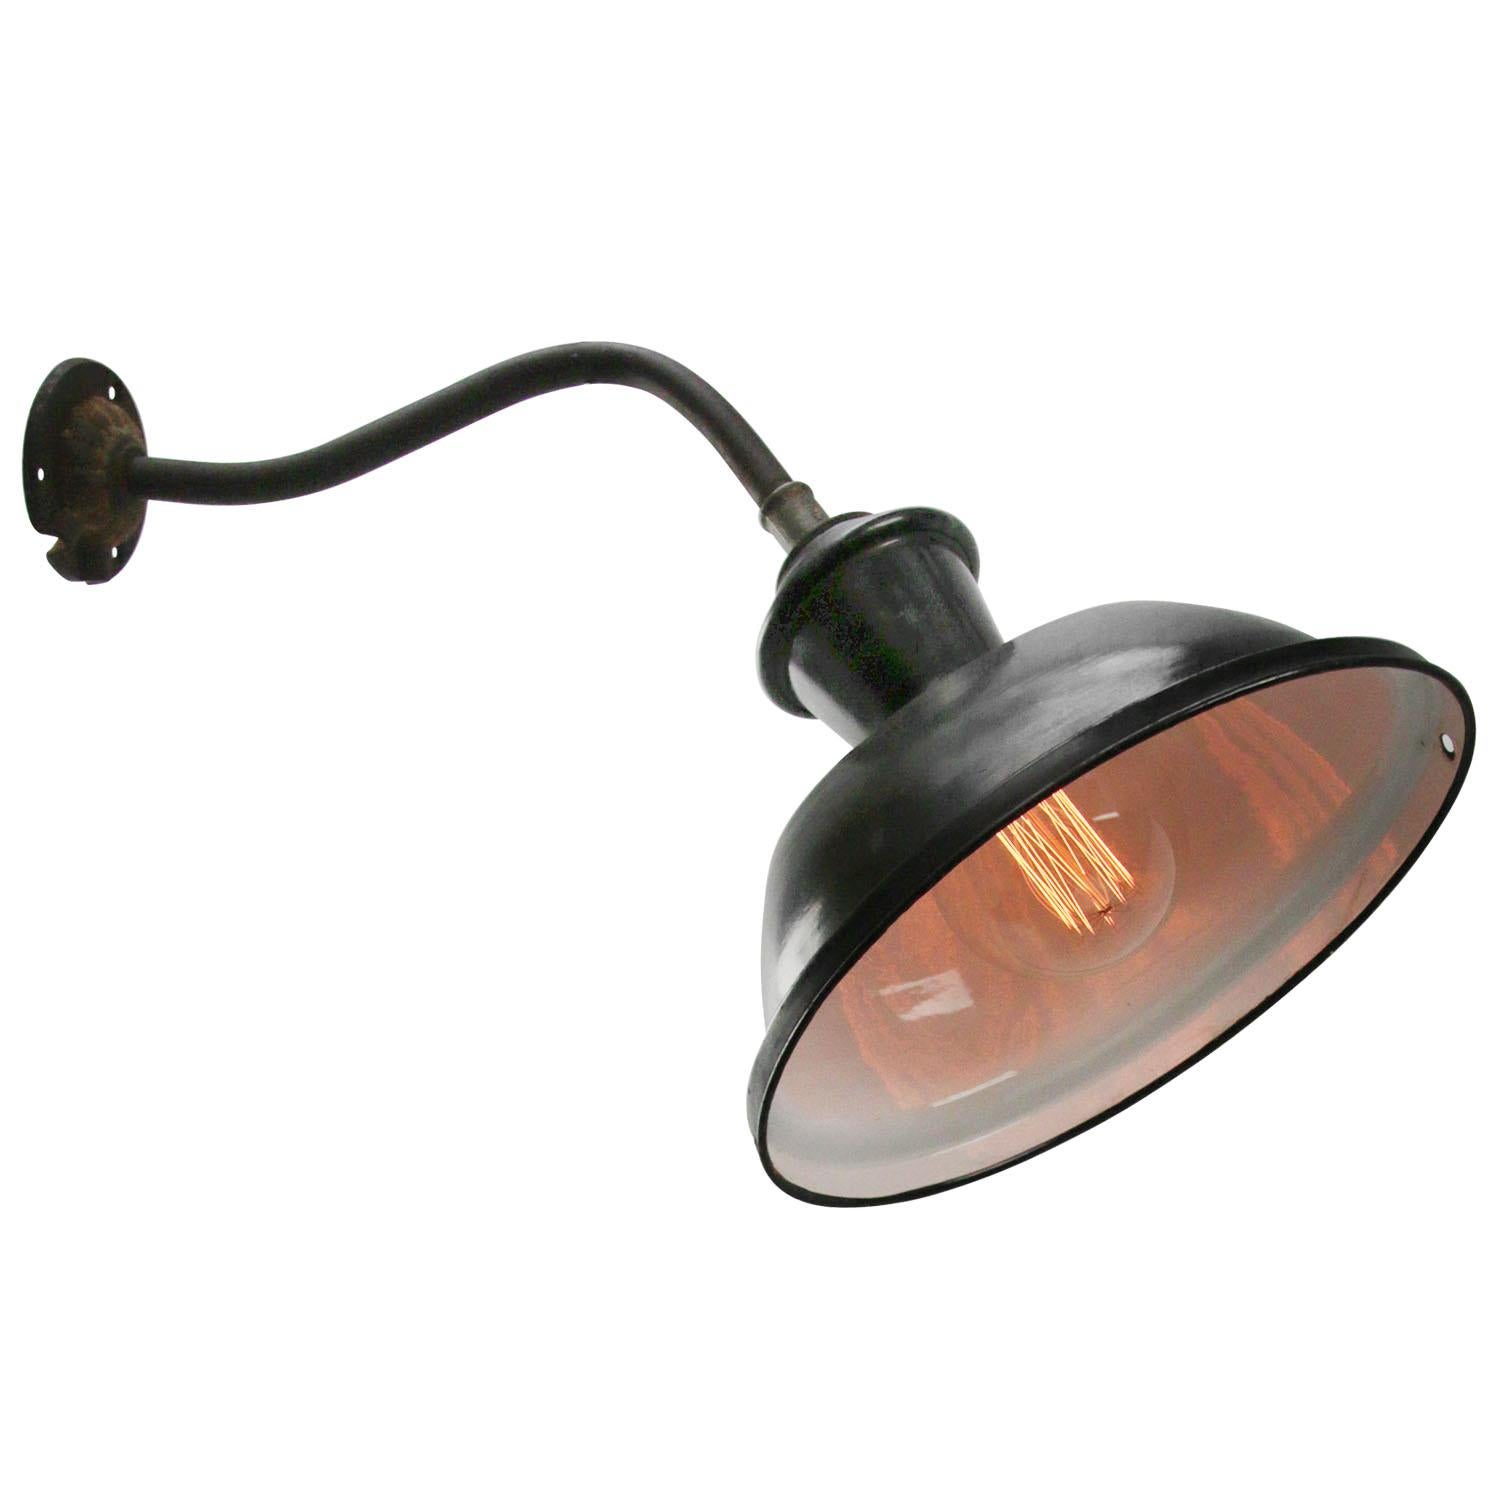 French Industrial wall light
Black enamel, white interior

diameter cast iron wall piece: 8 cm, 3 holes to secur

Weight: 1.20 kg / 2.6 lb

Priced per individual item. All lamps have been made suitable by international standards for